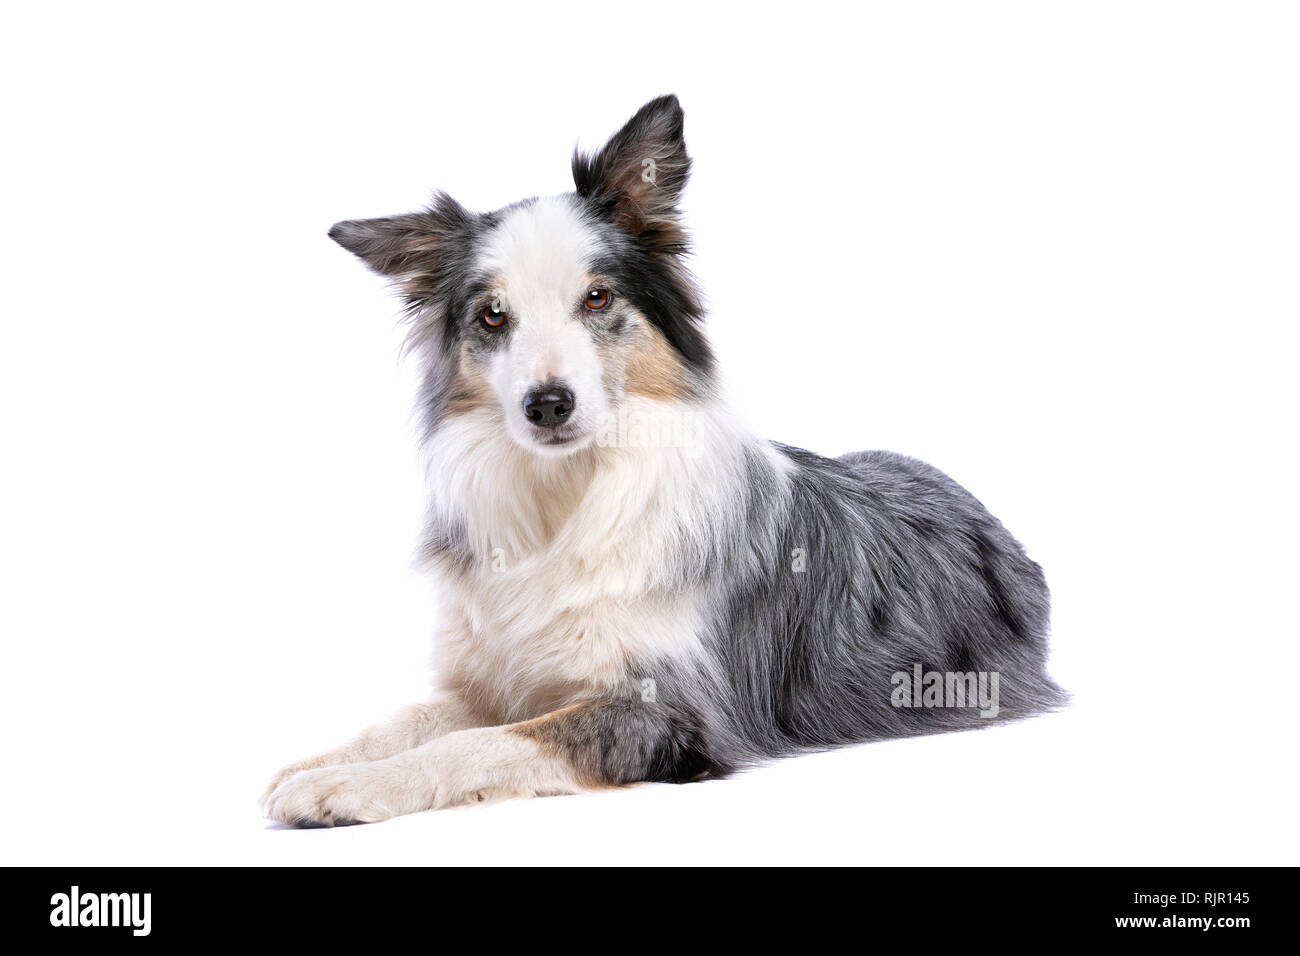 Old Merle border collie dog in front of a white background Stock Photo